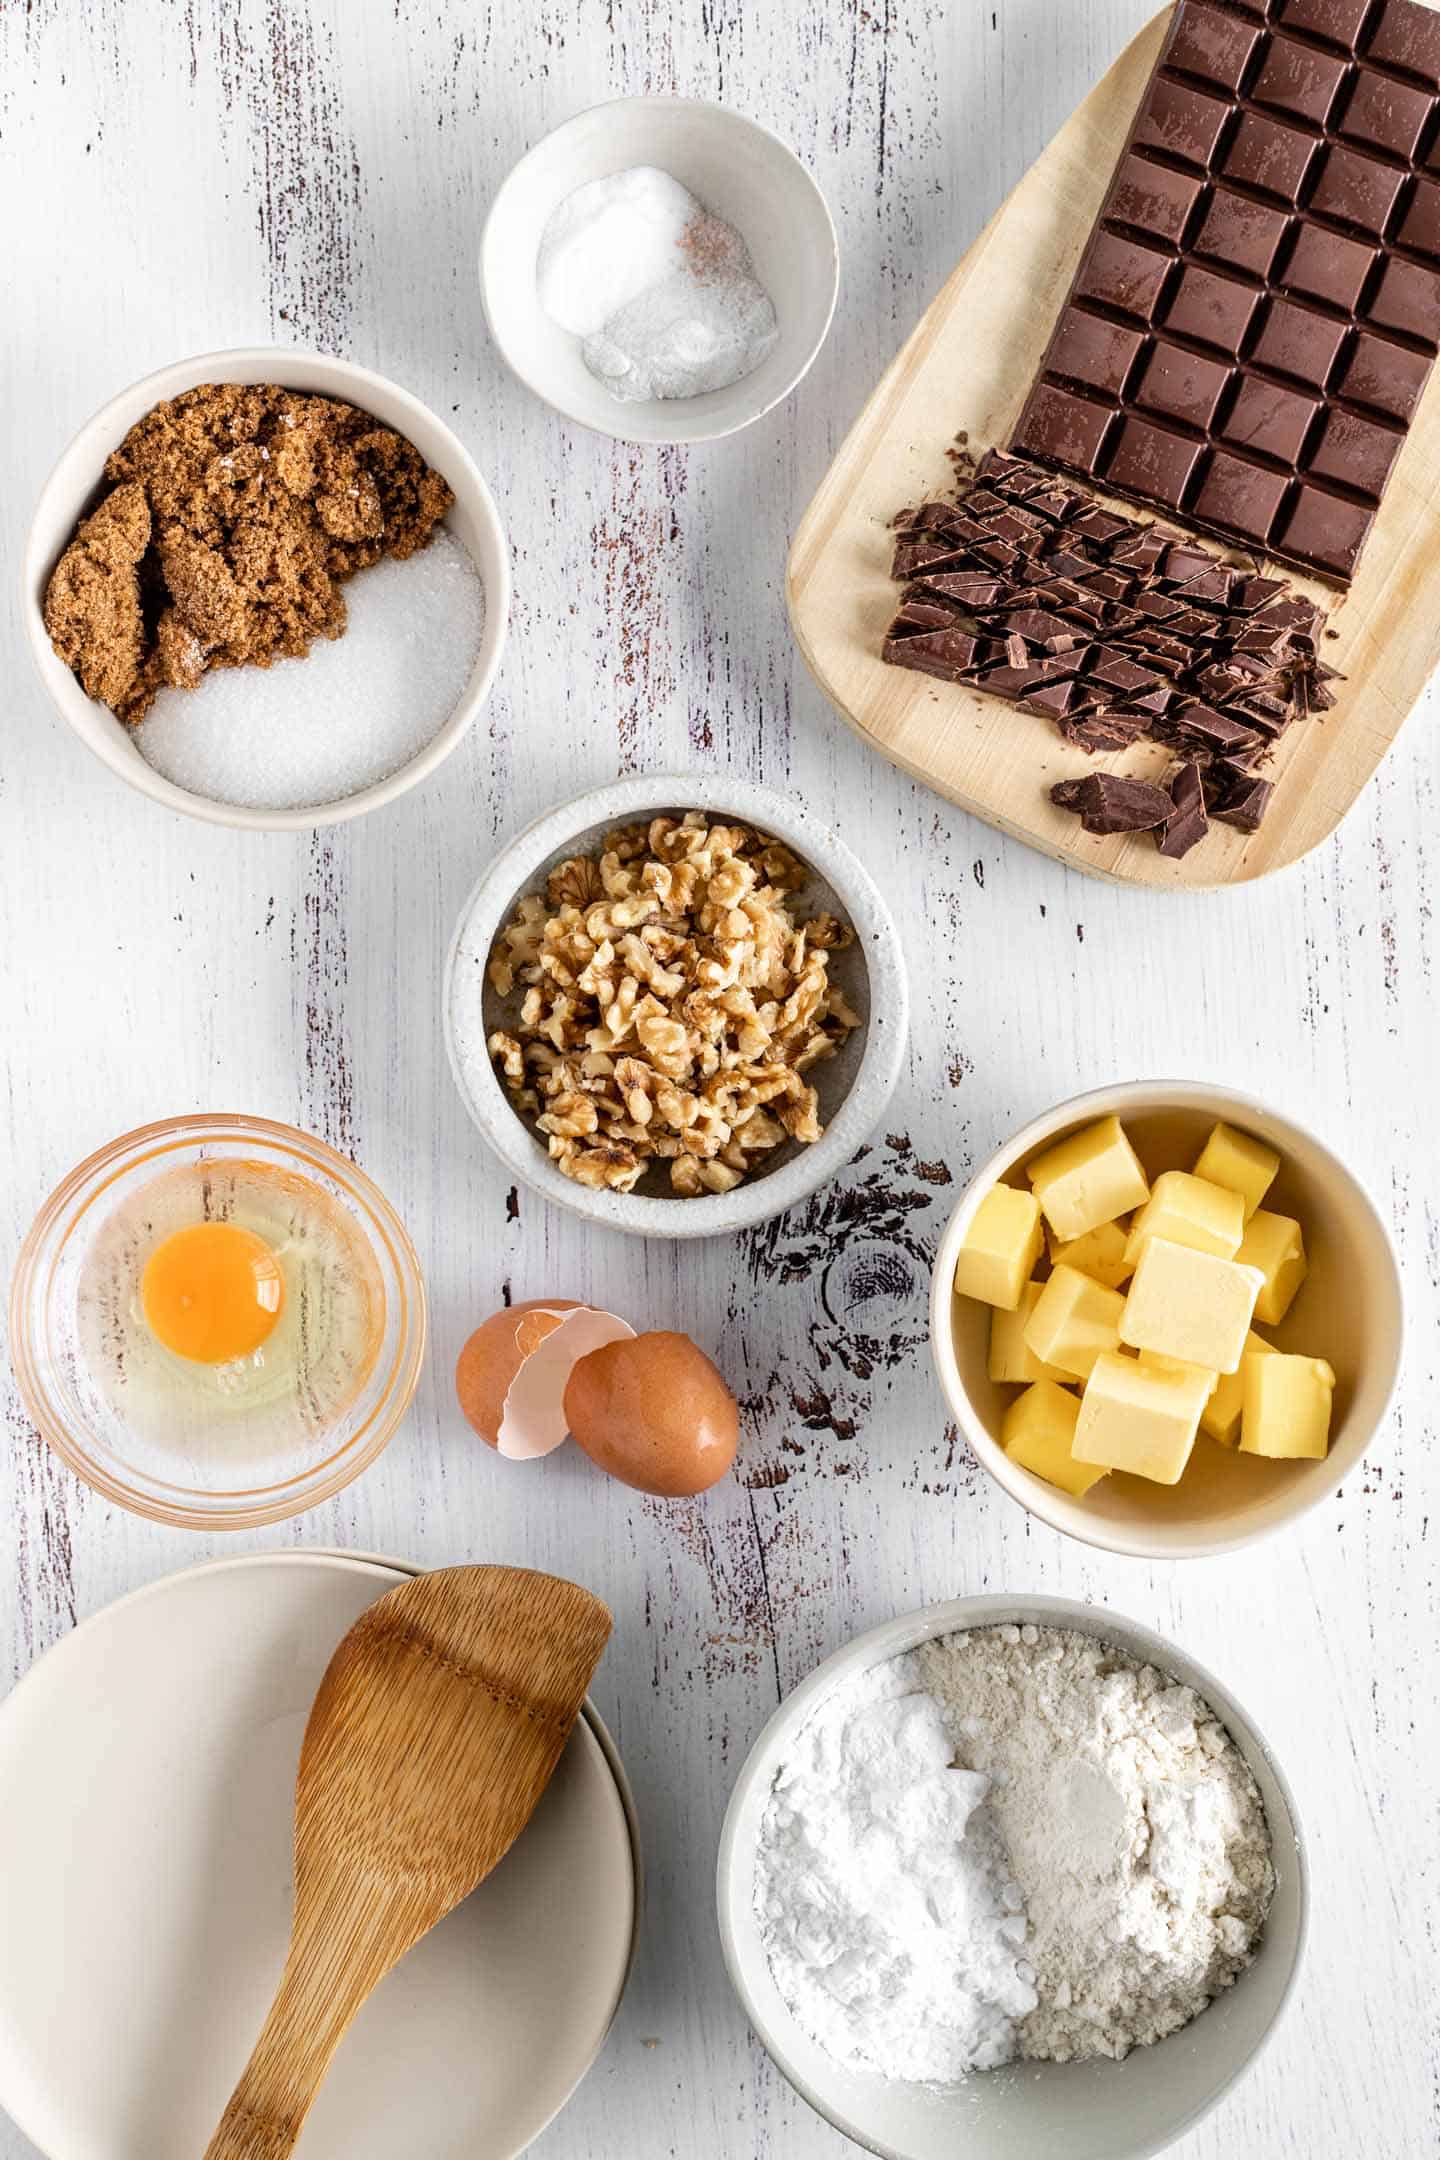 Necessary ingredients for this recipe: Eggs, butter, white sugar, brown sugar, flour, corn starch, choc chunks and walnuts